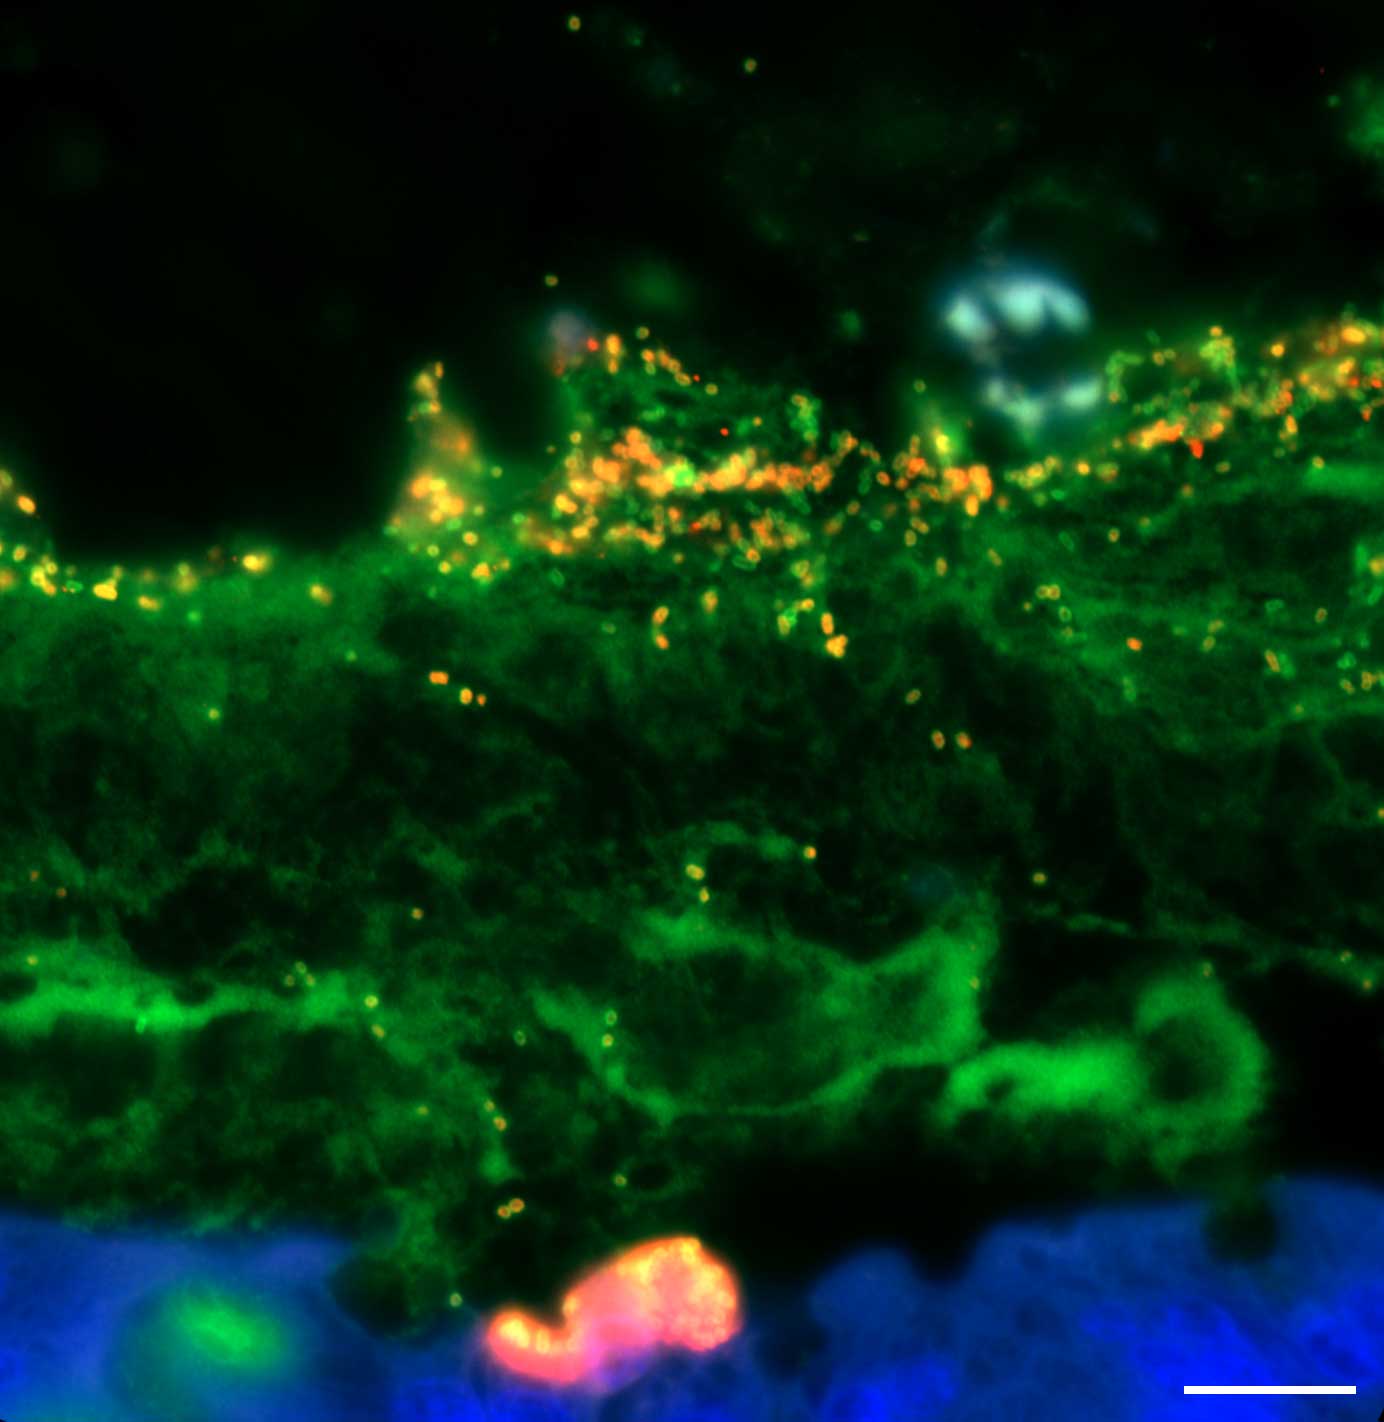 The Citrobacter rodentium (orange) rely on sugars in the intestinal mucus layer (green).